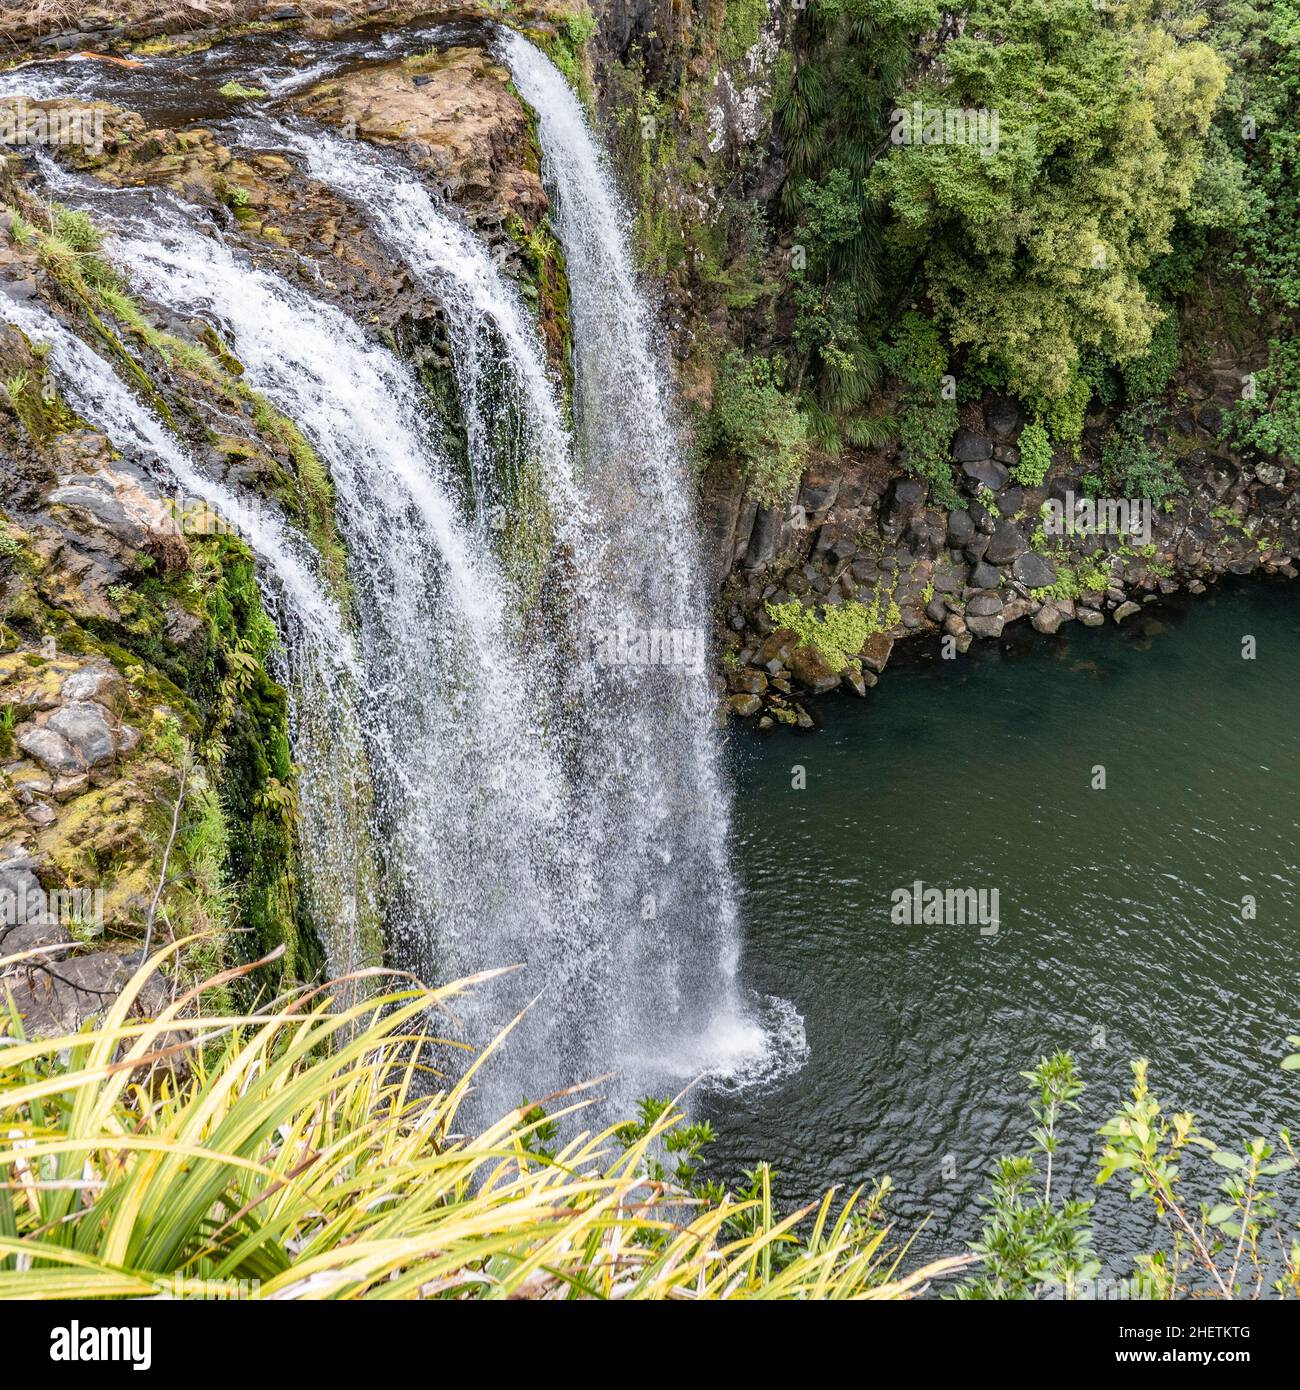 Whangarei Falls Located in the Whangarei Scenic Reserve on the Hatea River in New Sealand Stock Photo